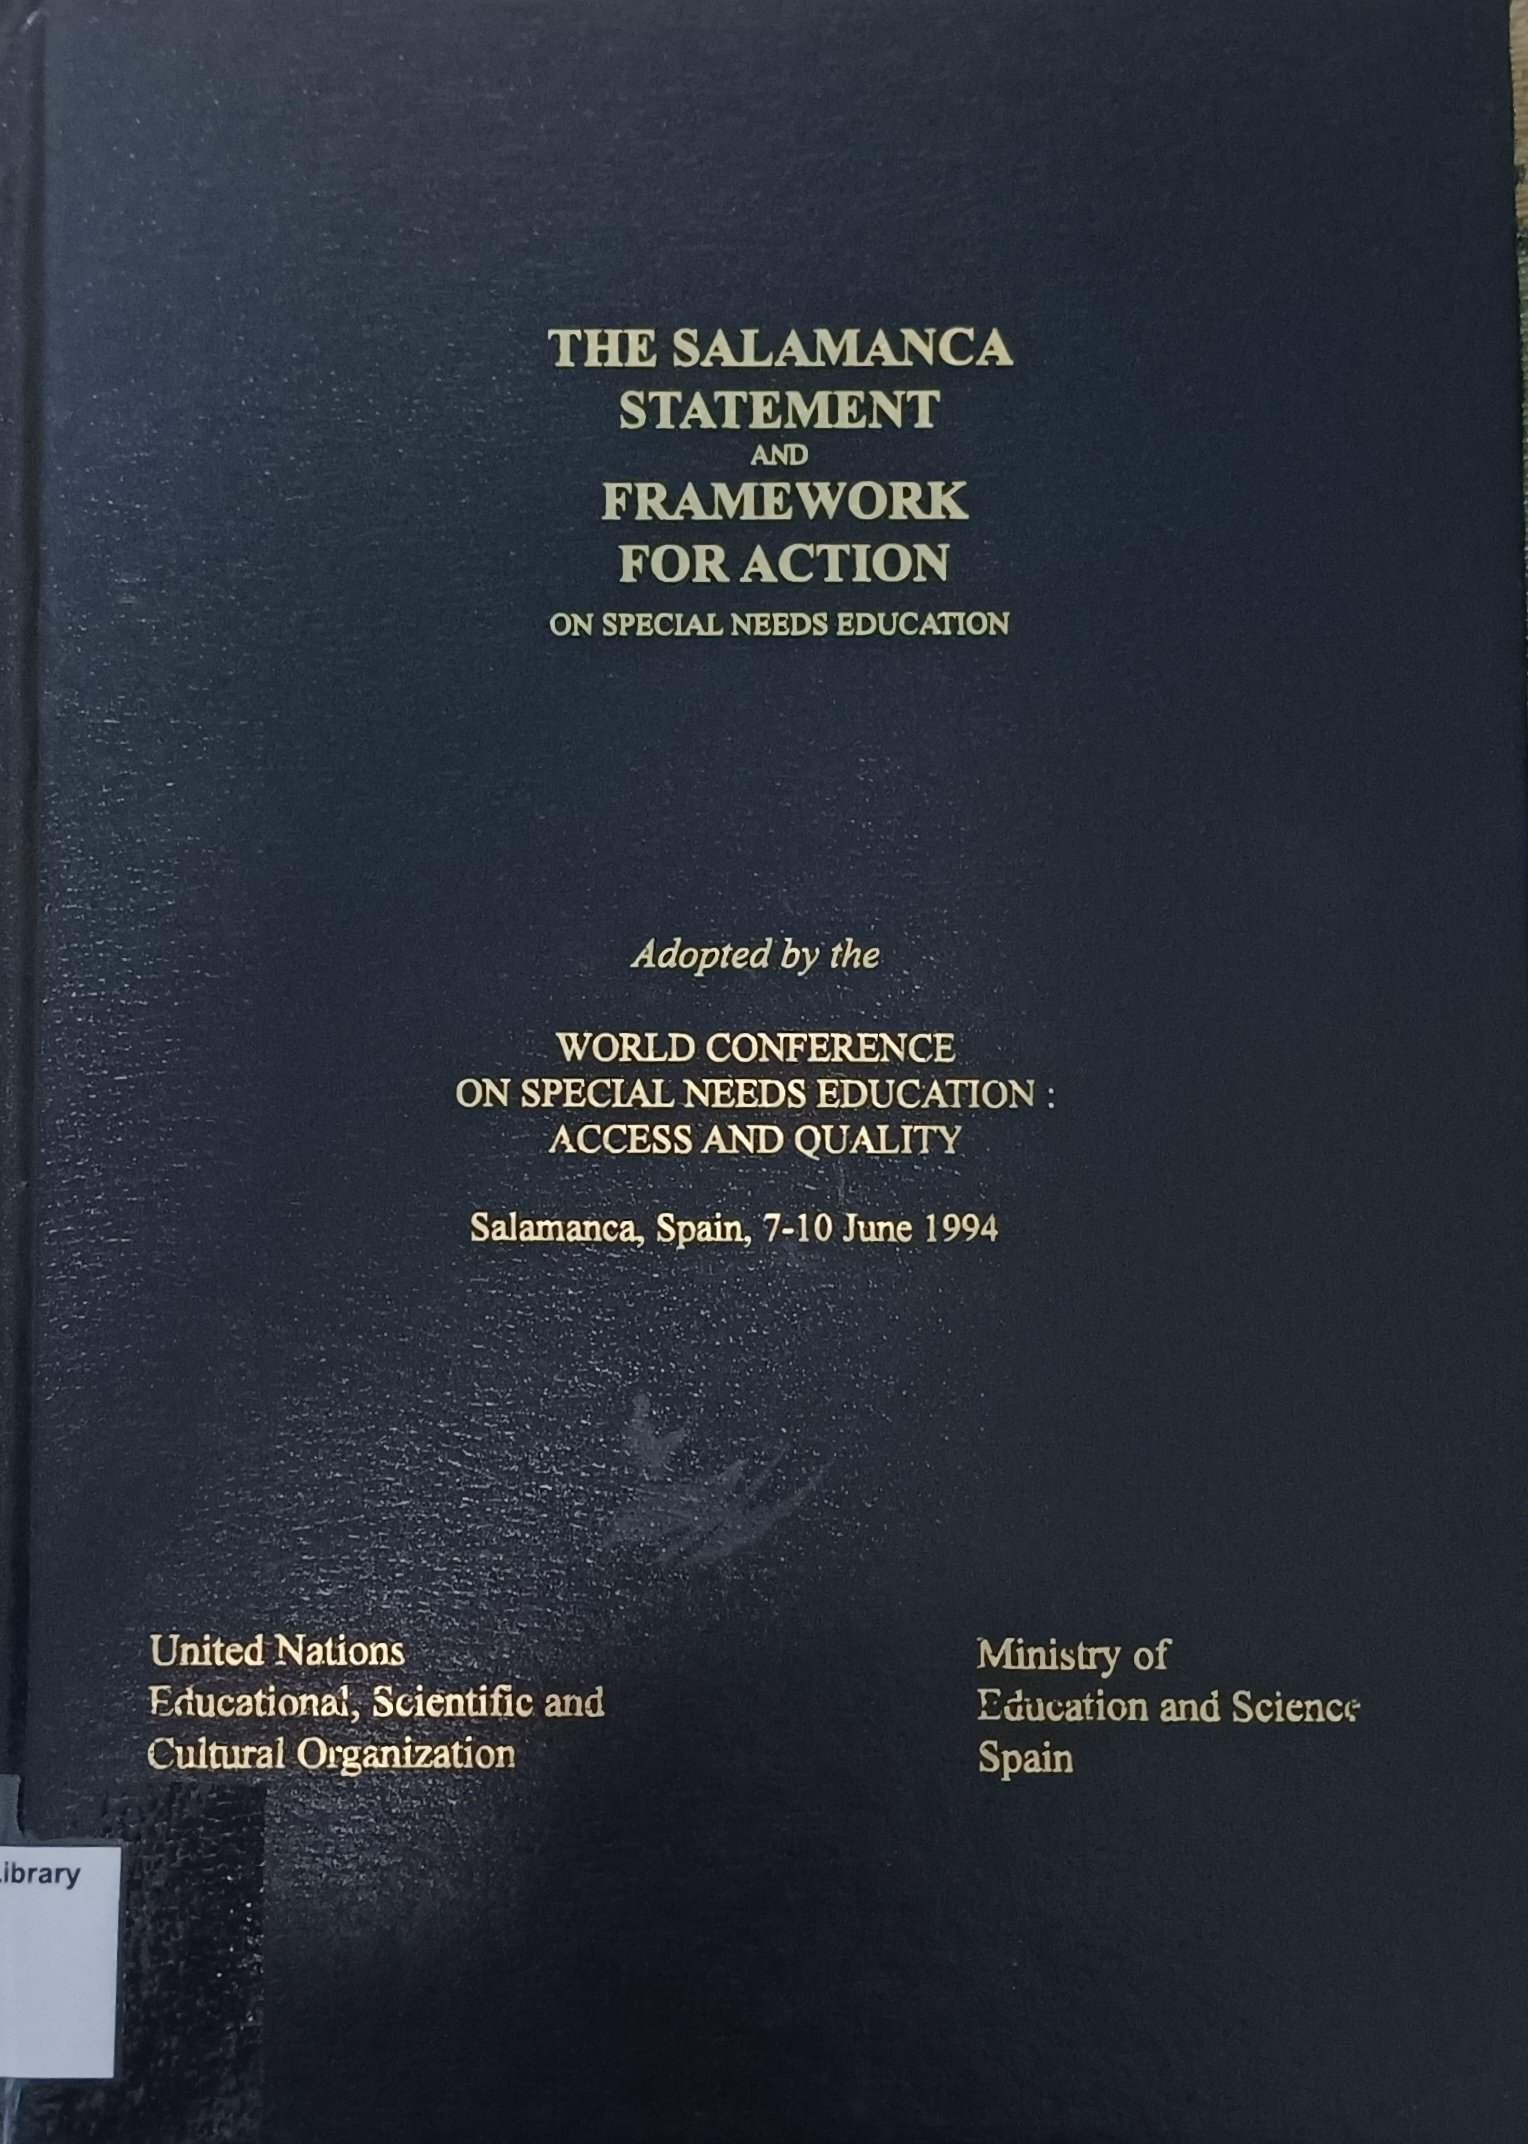 Cover image for The Salamanca Statement and Framework for Action on Special Needs Education. Adopted by the World Conference on Special Needs Education : Access and Quality (Salamanca, Spain, June 7-10, 1994). bibliographic